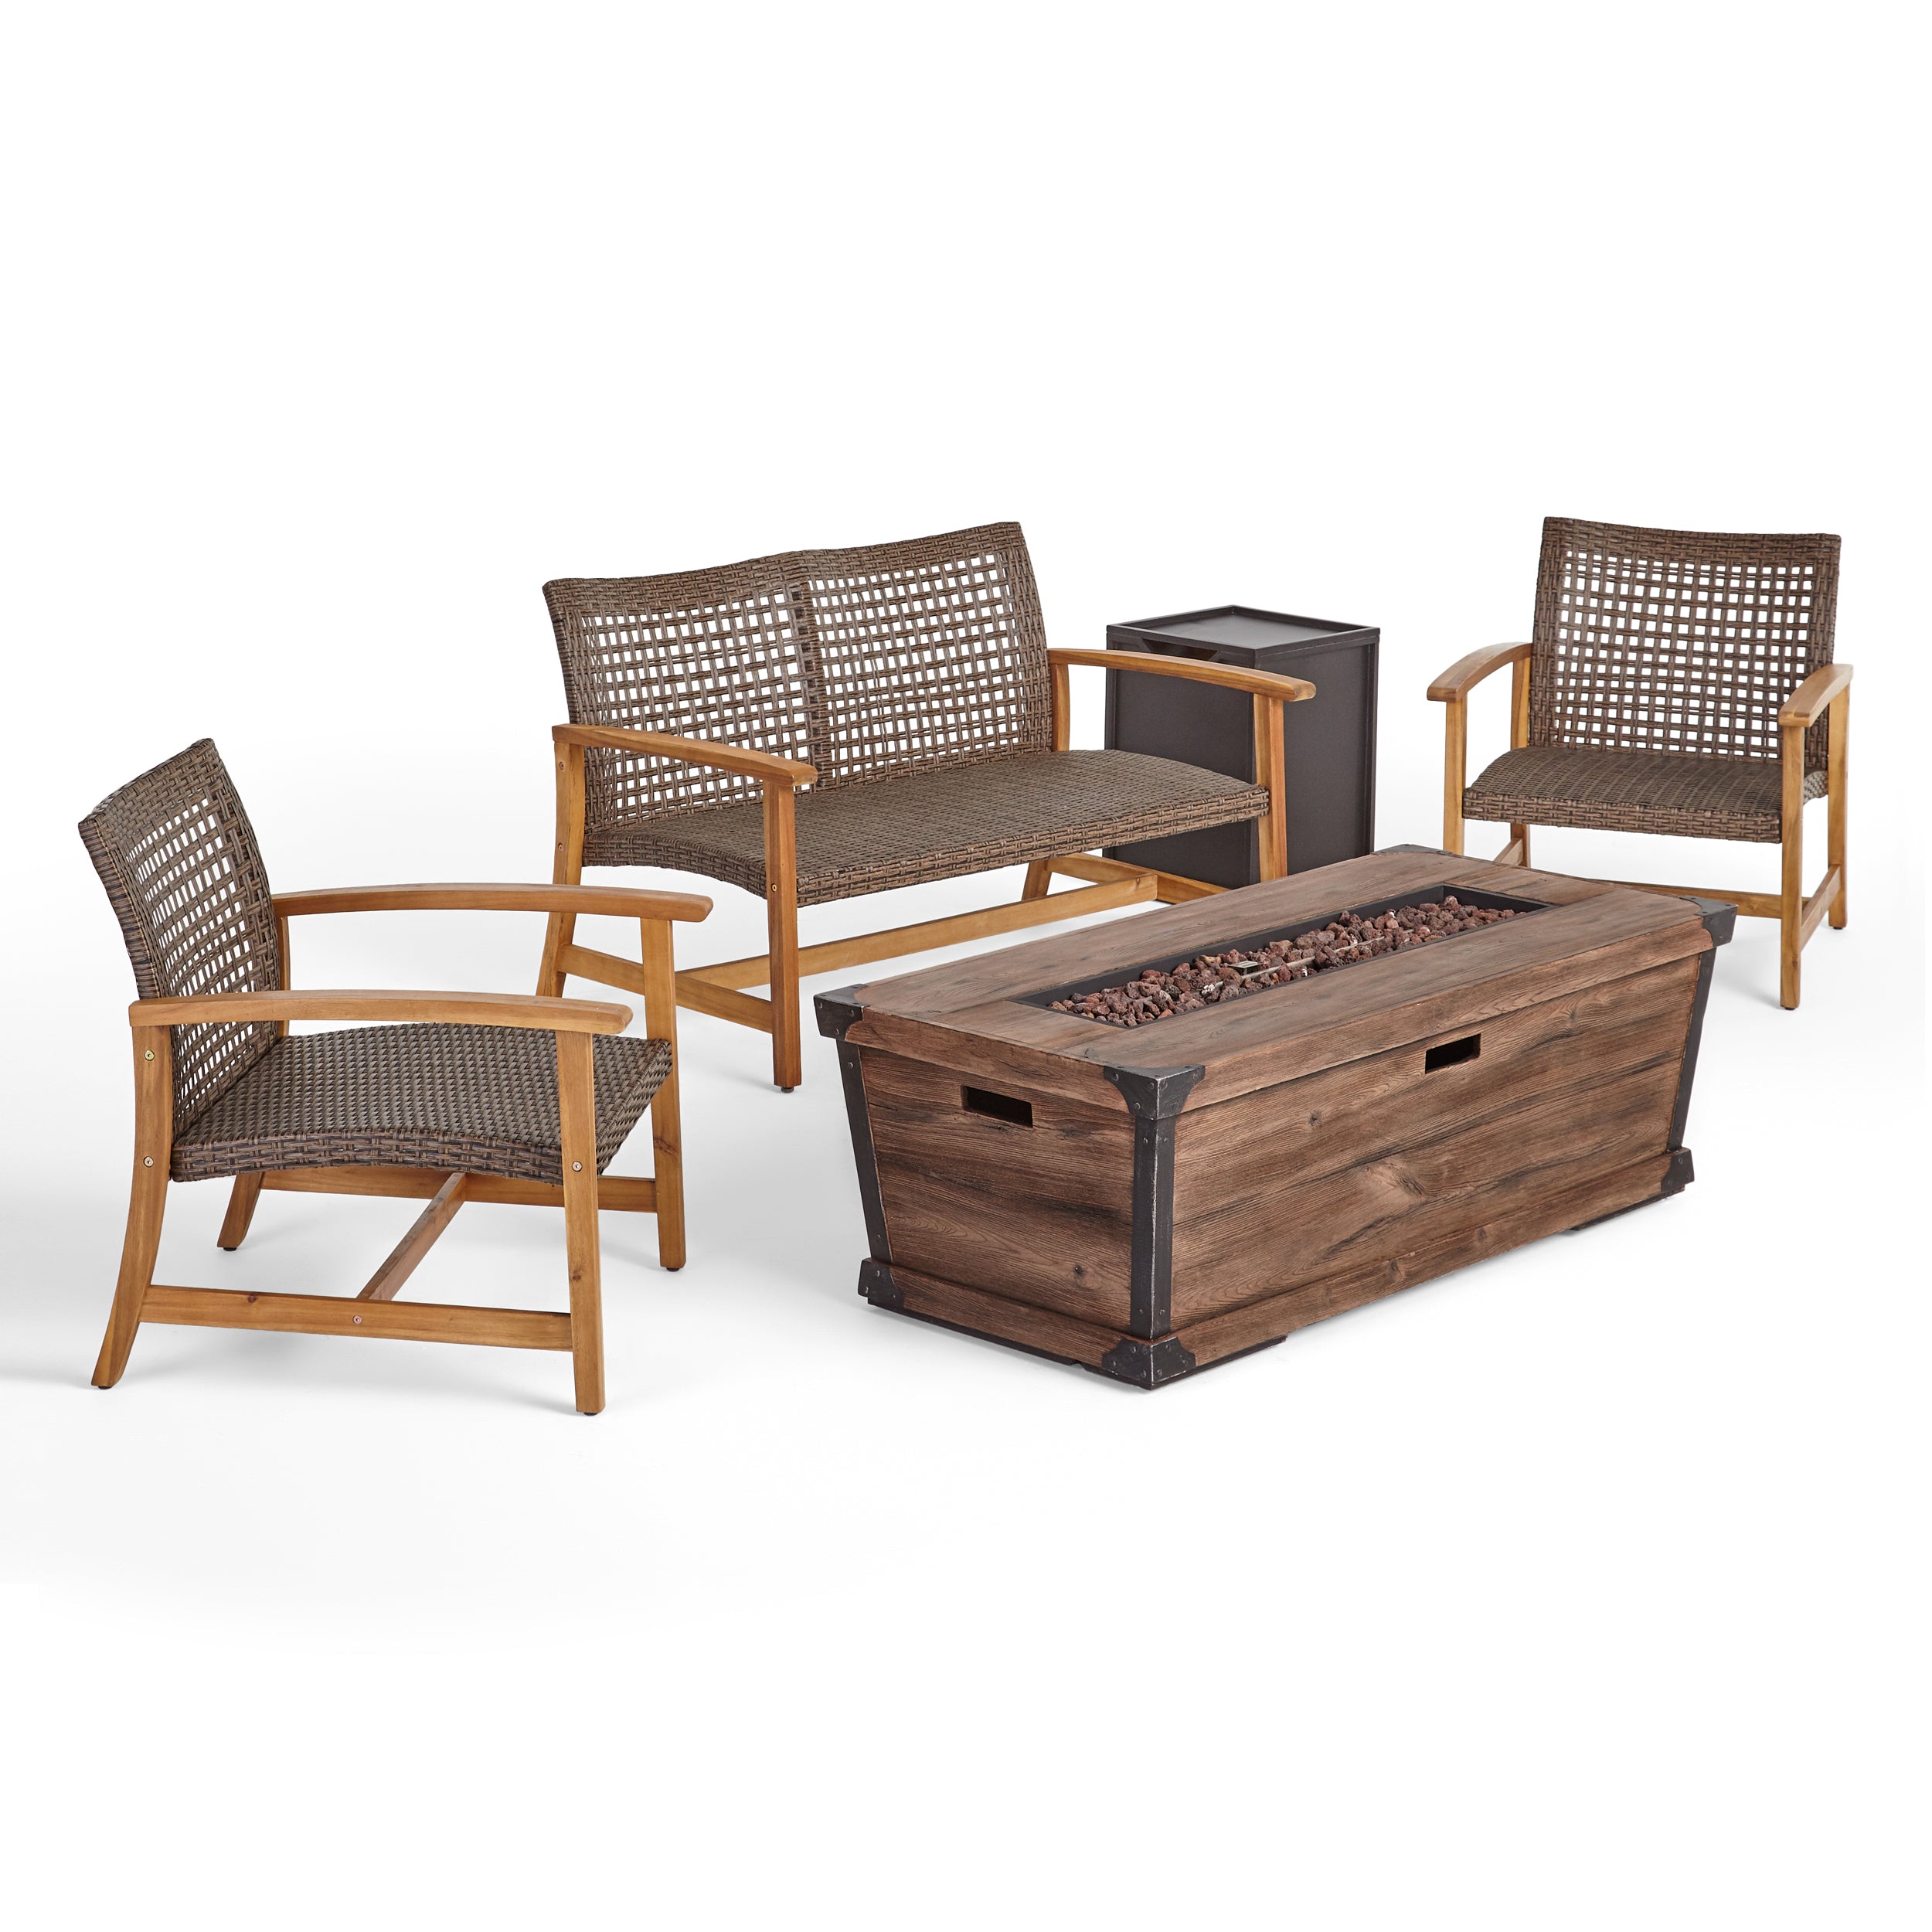 Airyanna Outdoor 3 Piece Wood and Wicker Chat Set with Fire Pit Natural Stained Gray